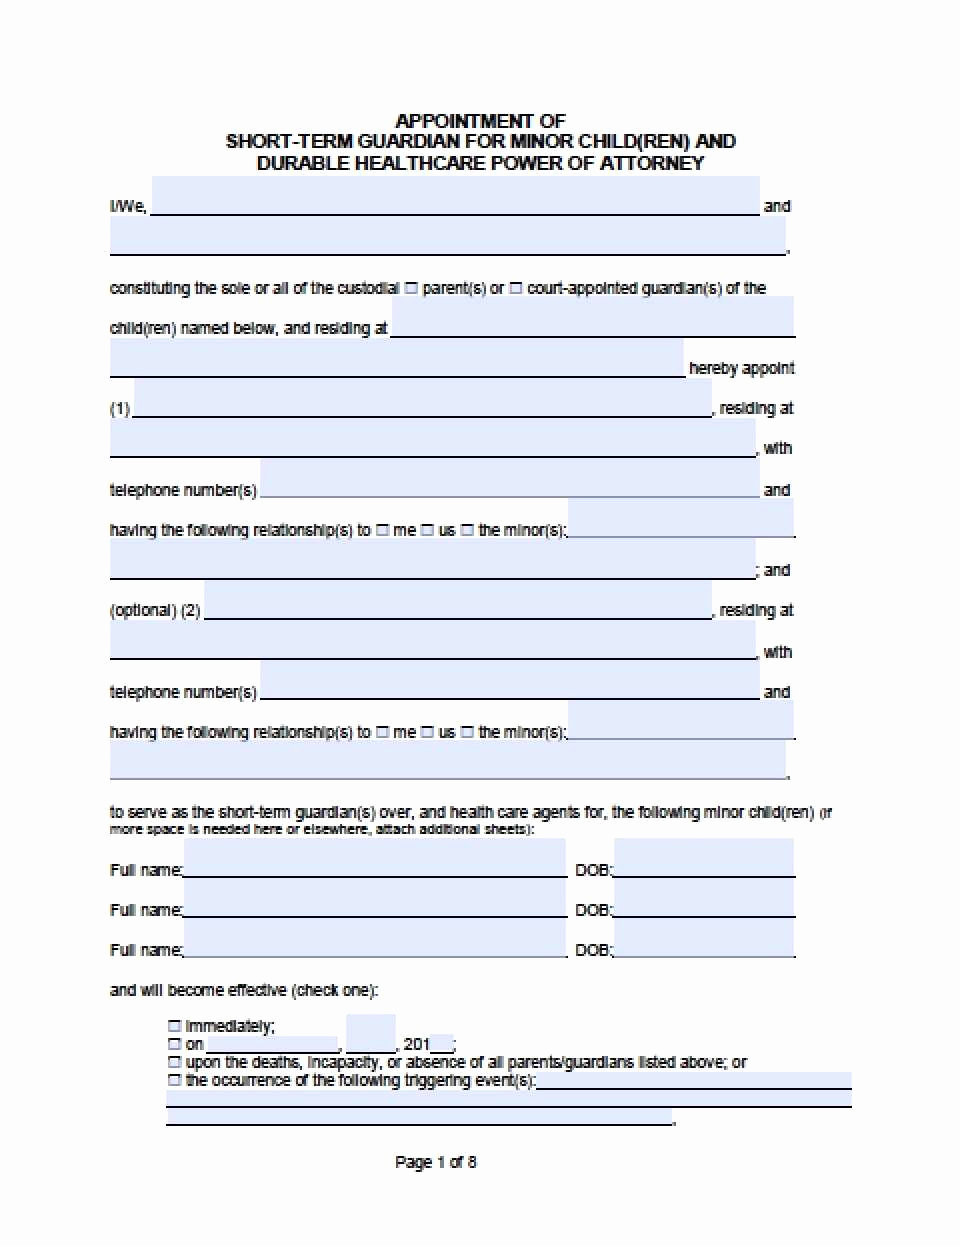 Free Temporary Guardianship form Awesome Temporary Guardianship Agreement form California Excellent